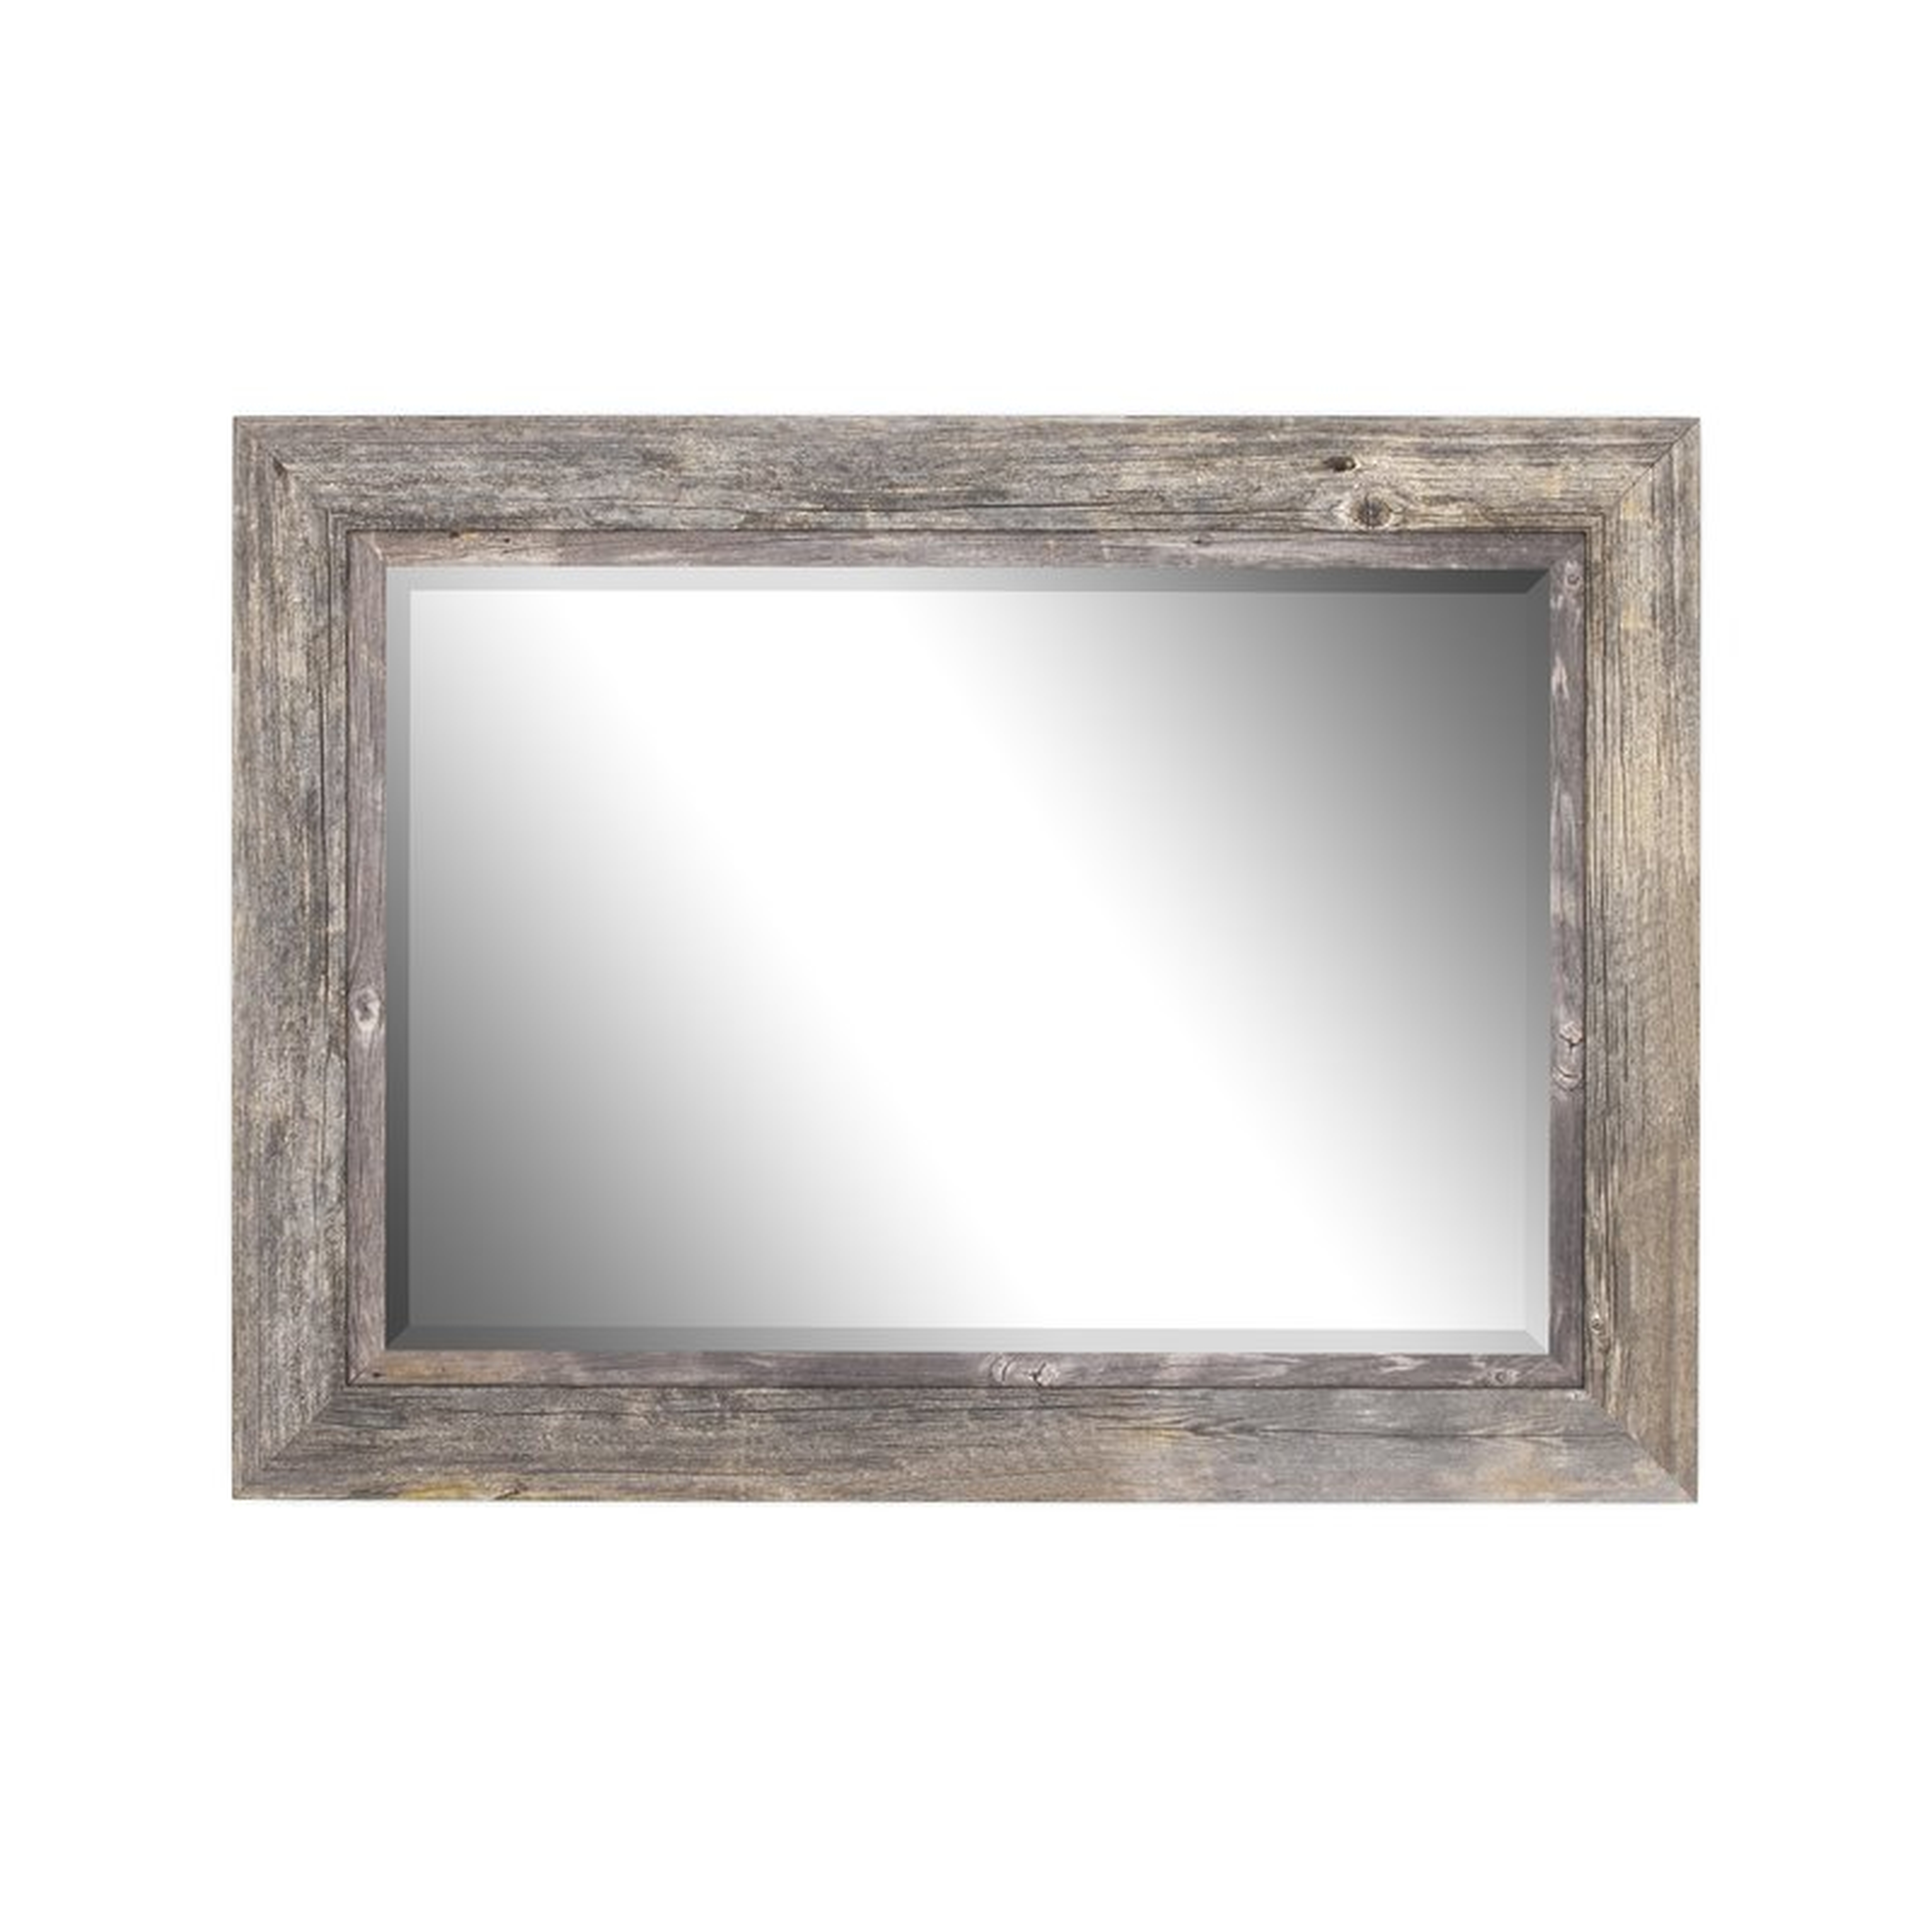 Traditional Beveled Distressed Accent Mirror - Birch Lane